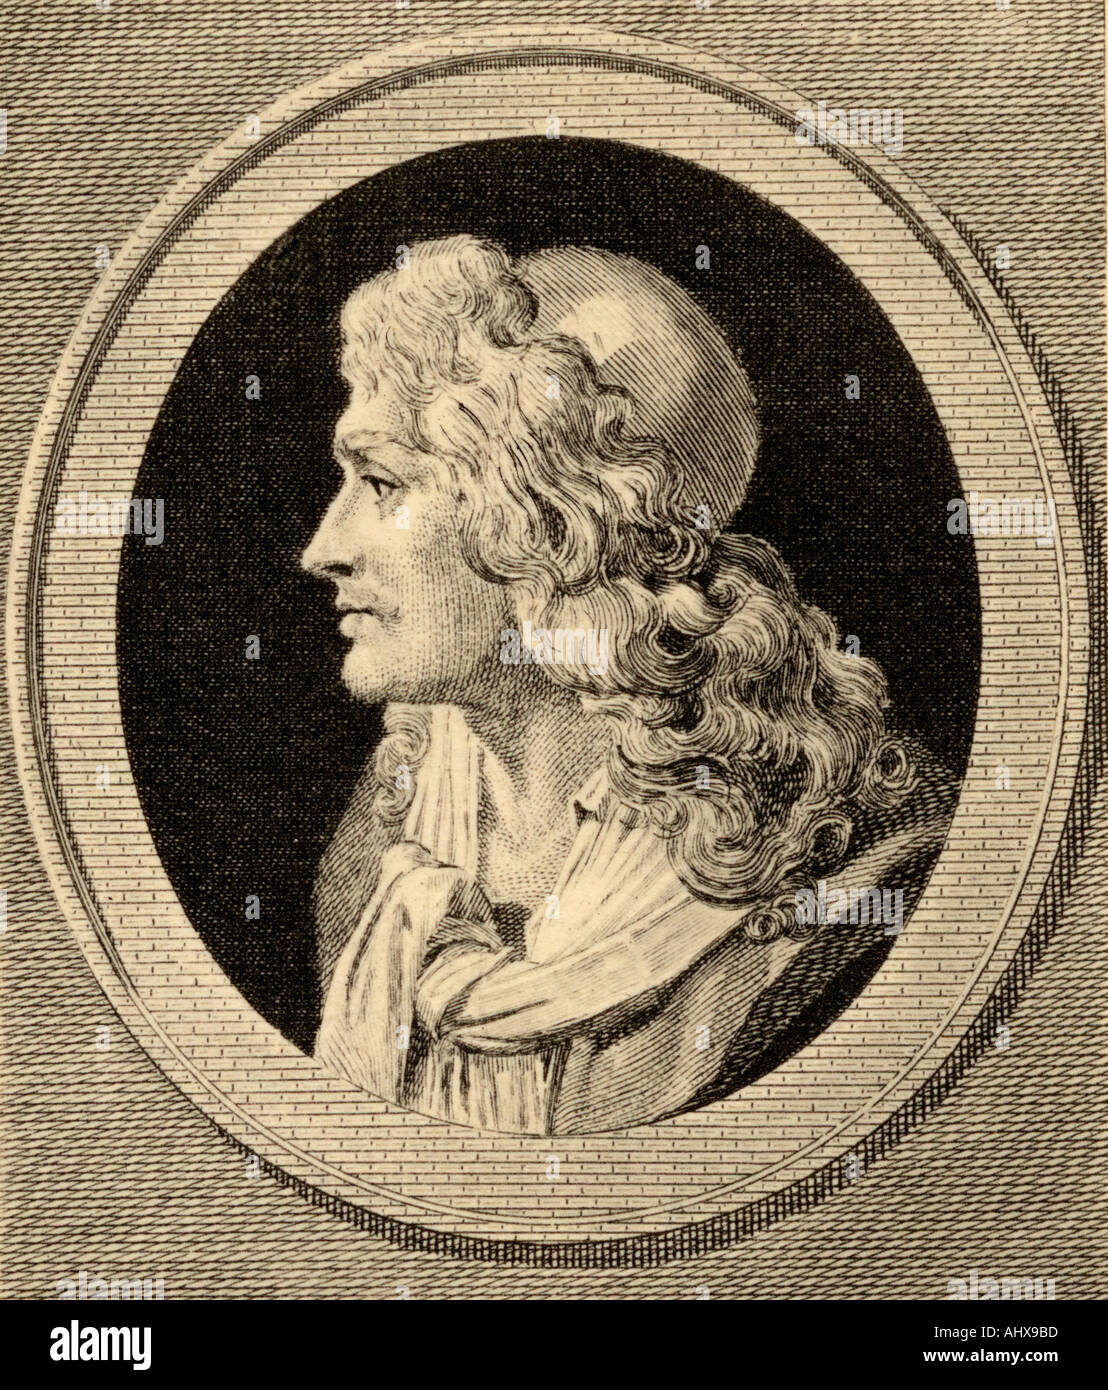 Jean-Baptiste Poquelin,aka Moliere, 1622 - 1673. French comic playwright, actor and poet. Stock Photo